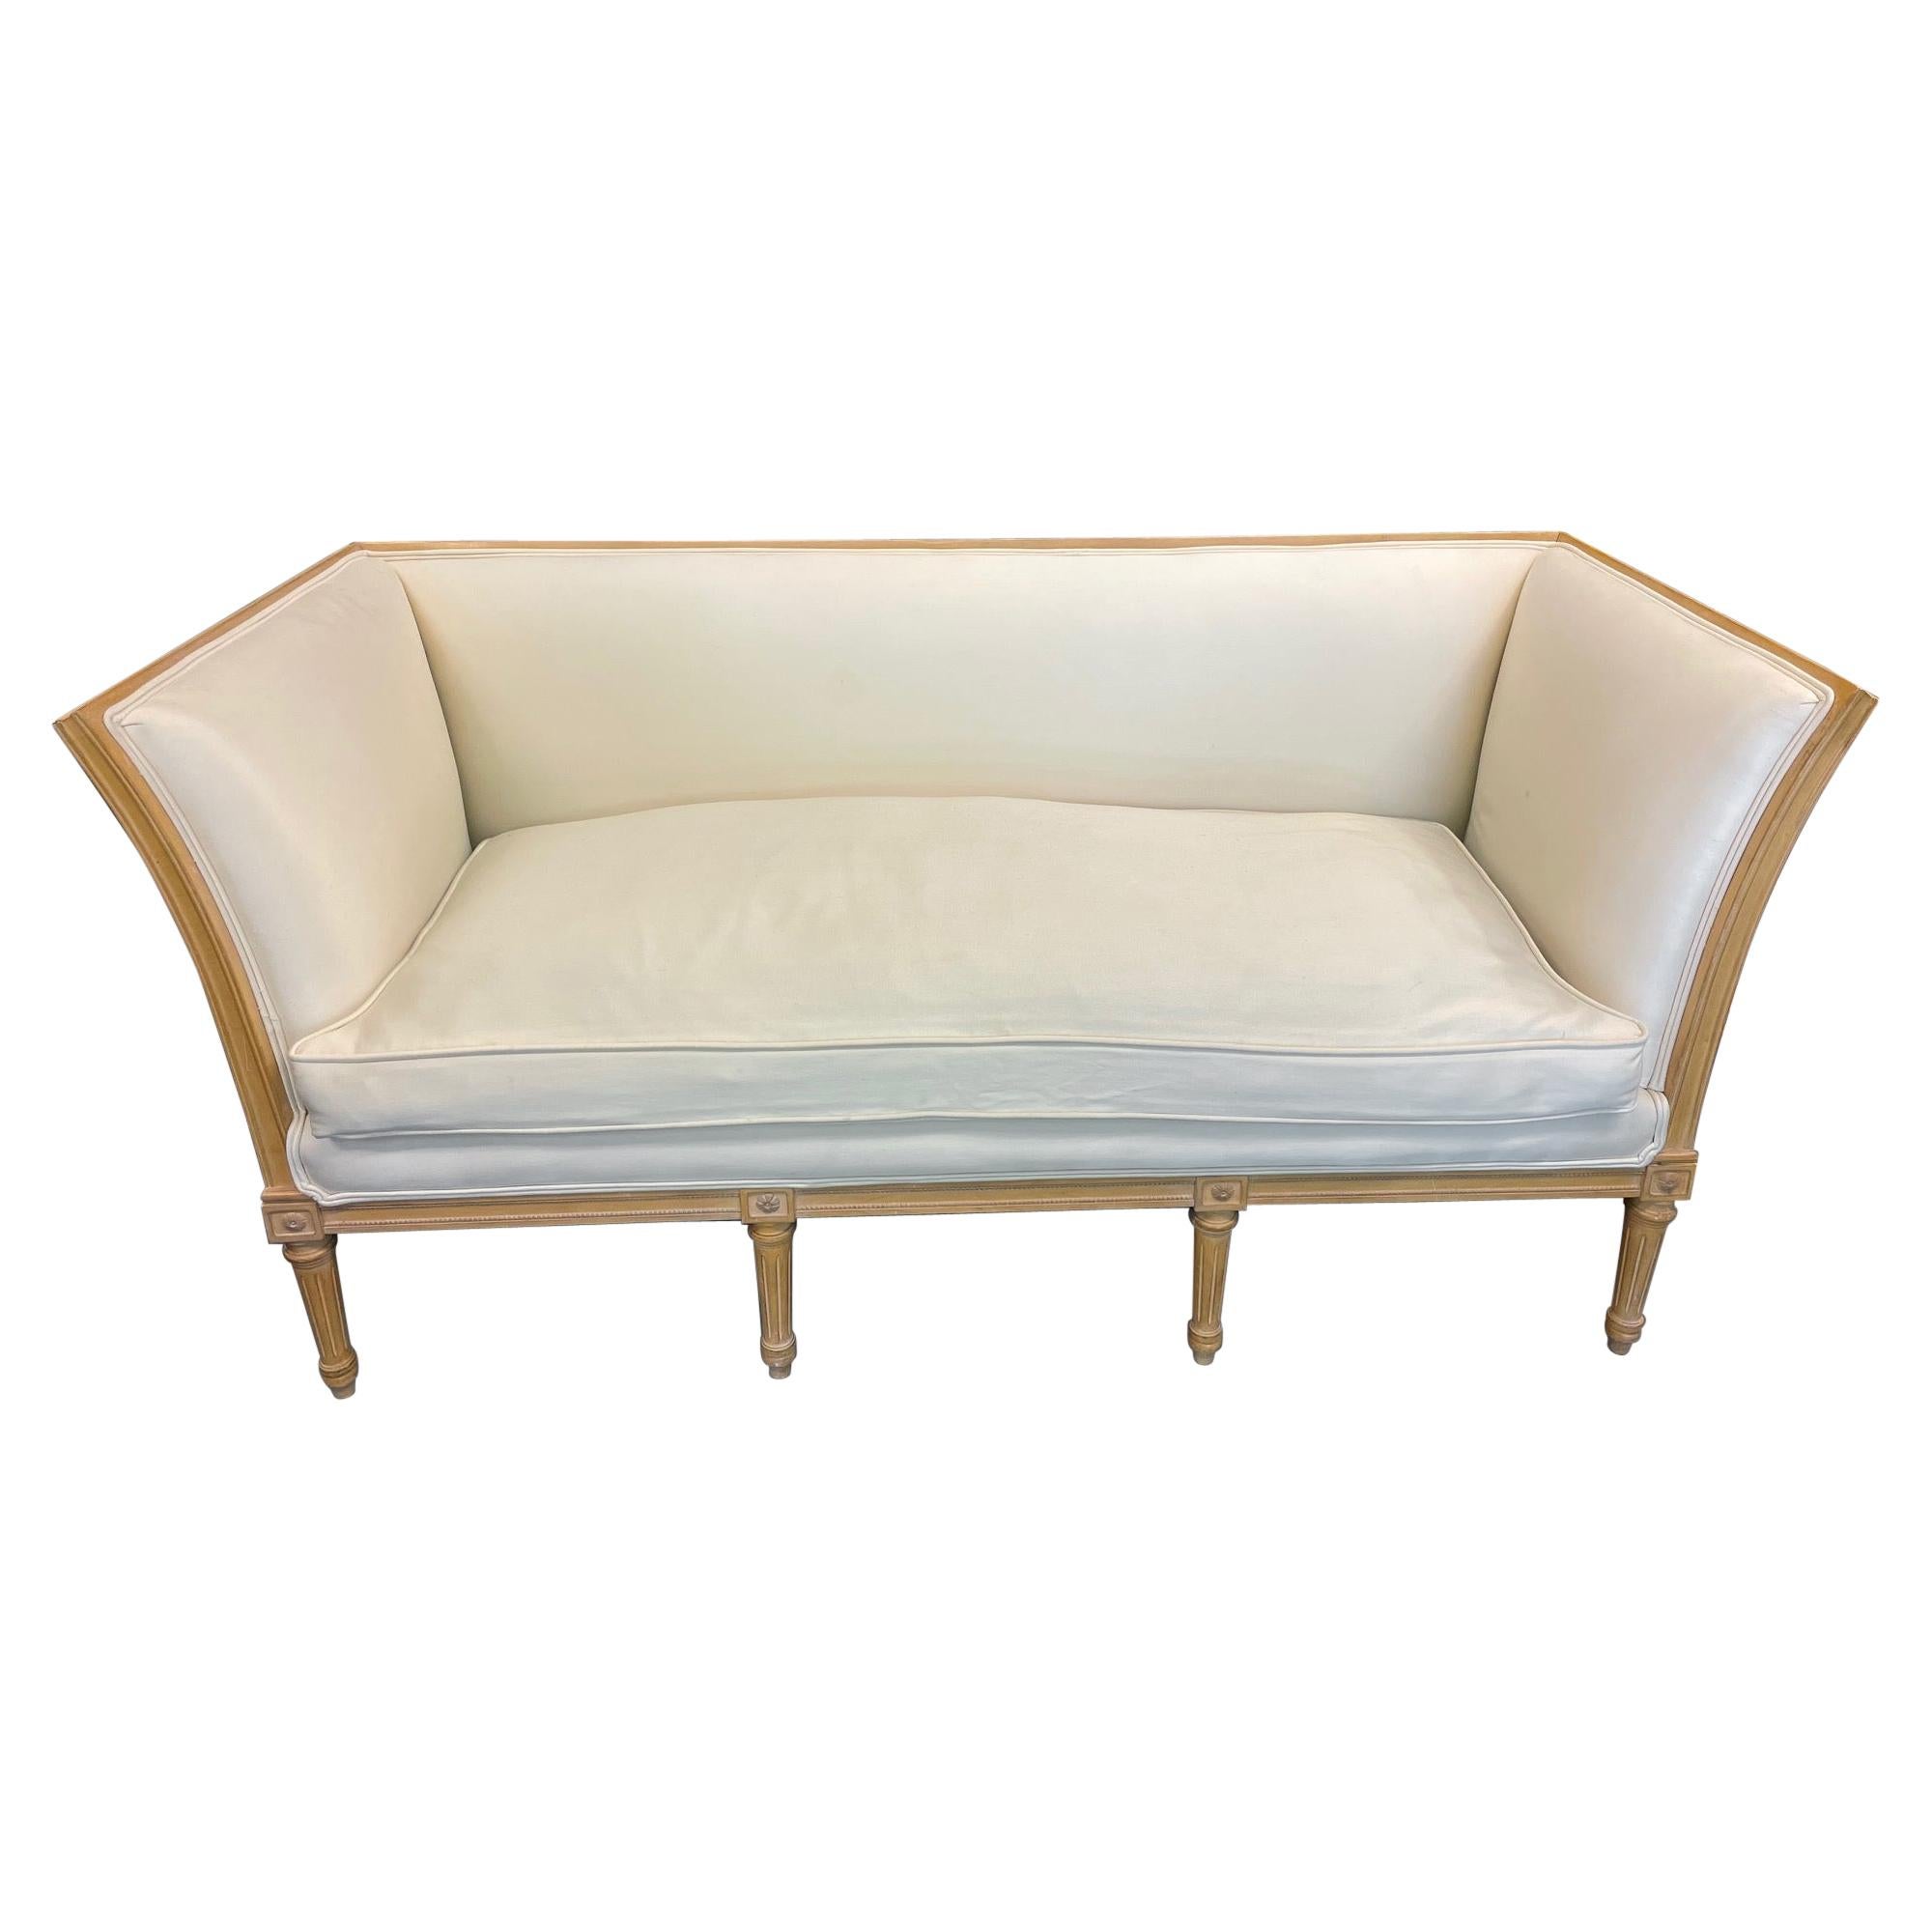 Louis XVI Style Cream Upholstered Settee For Sale